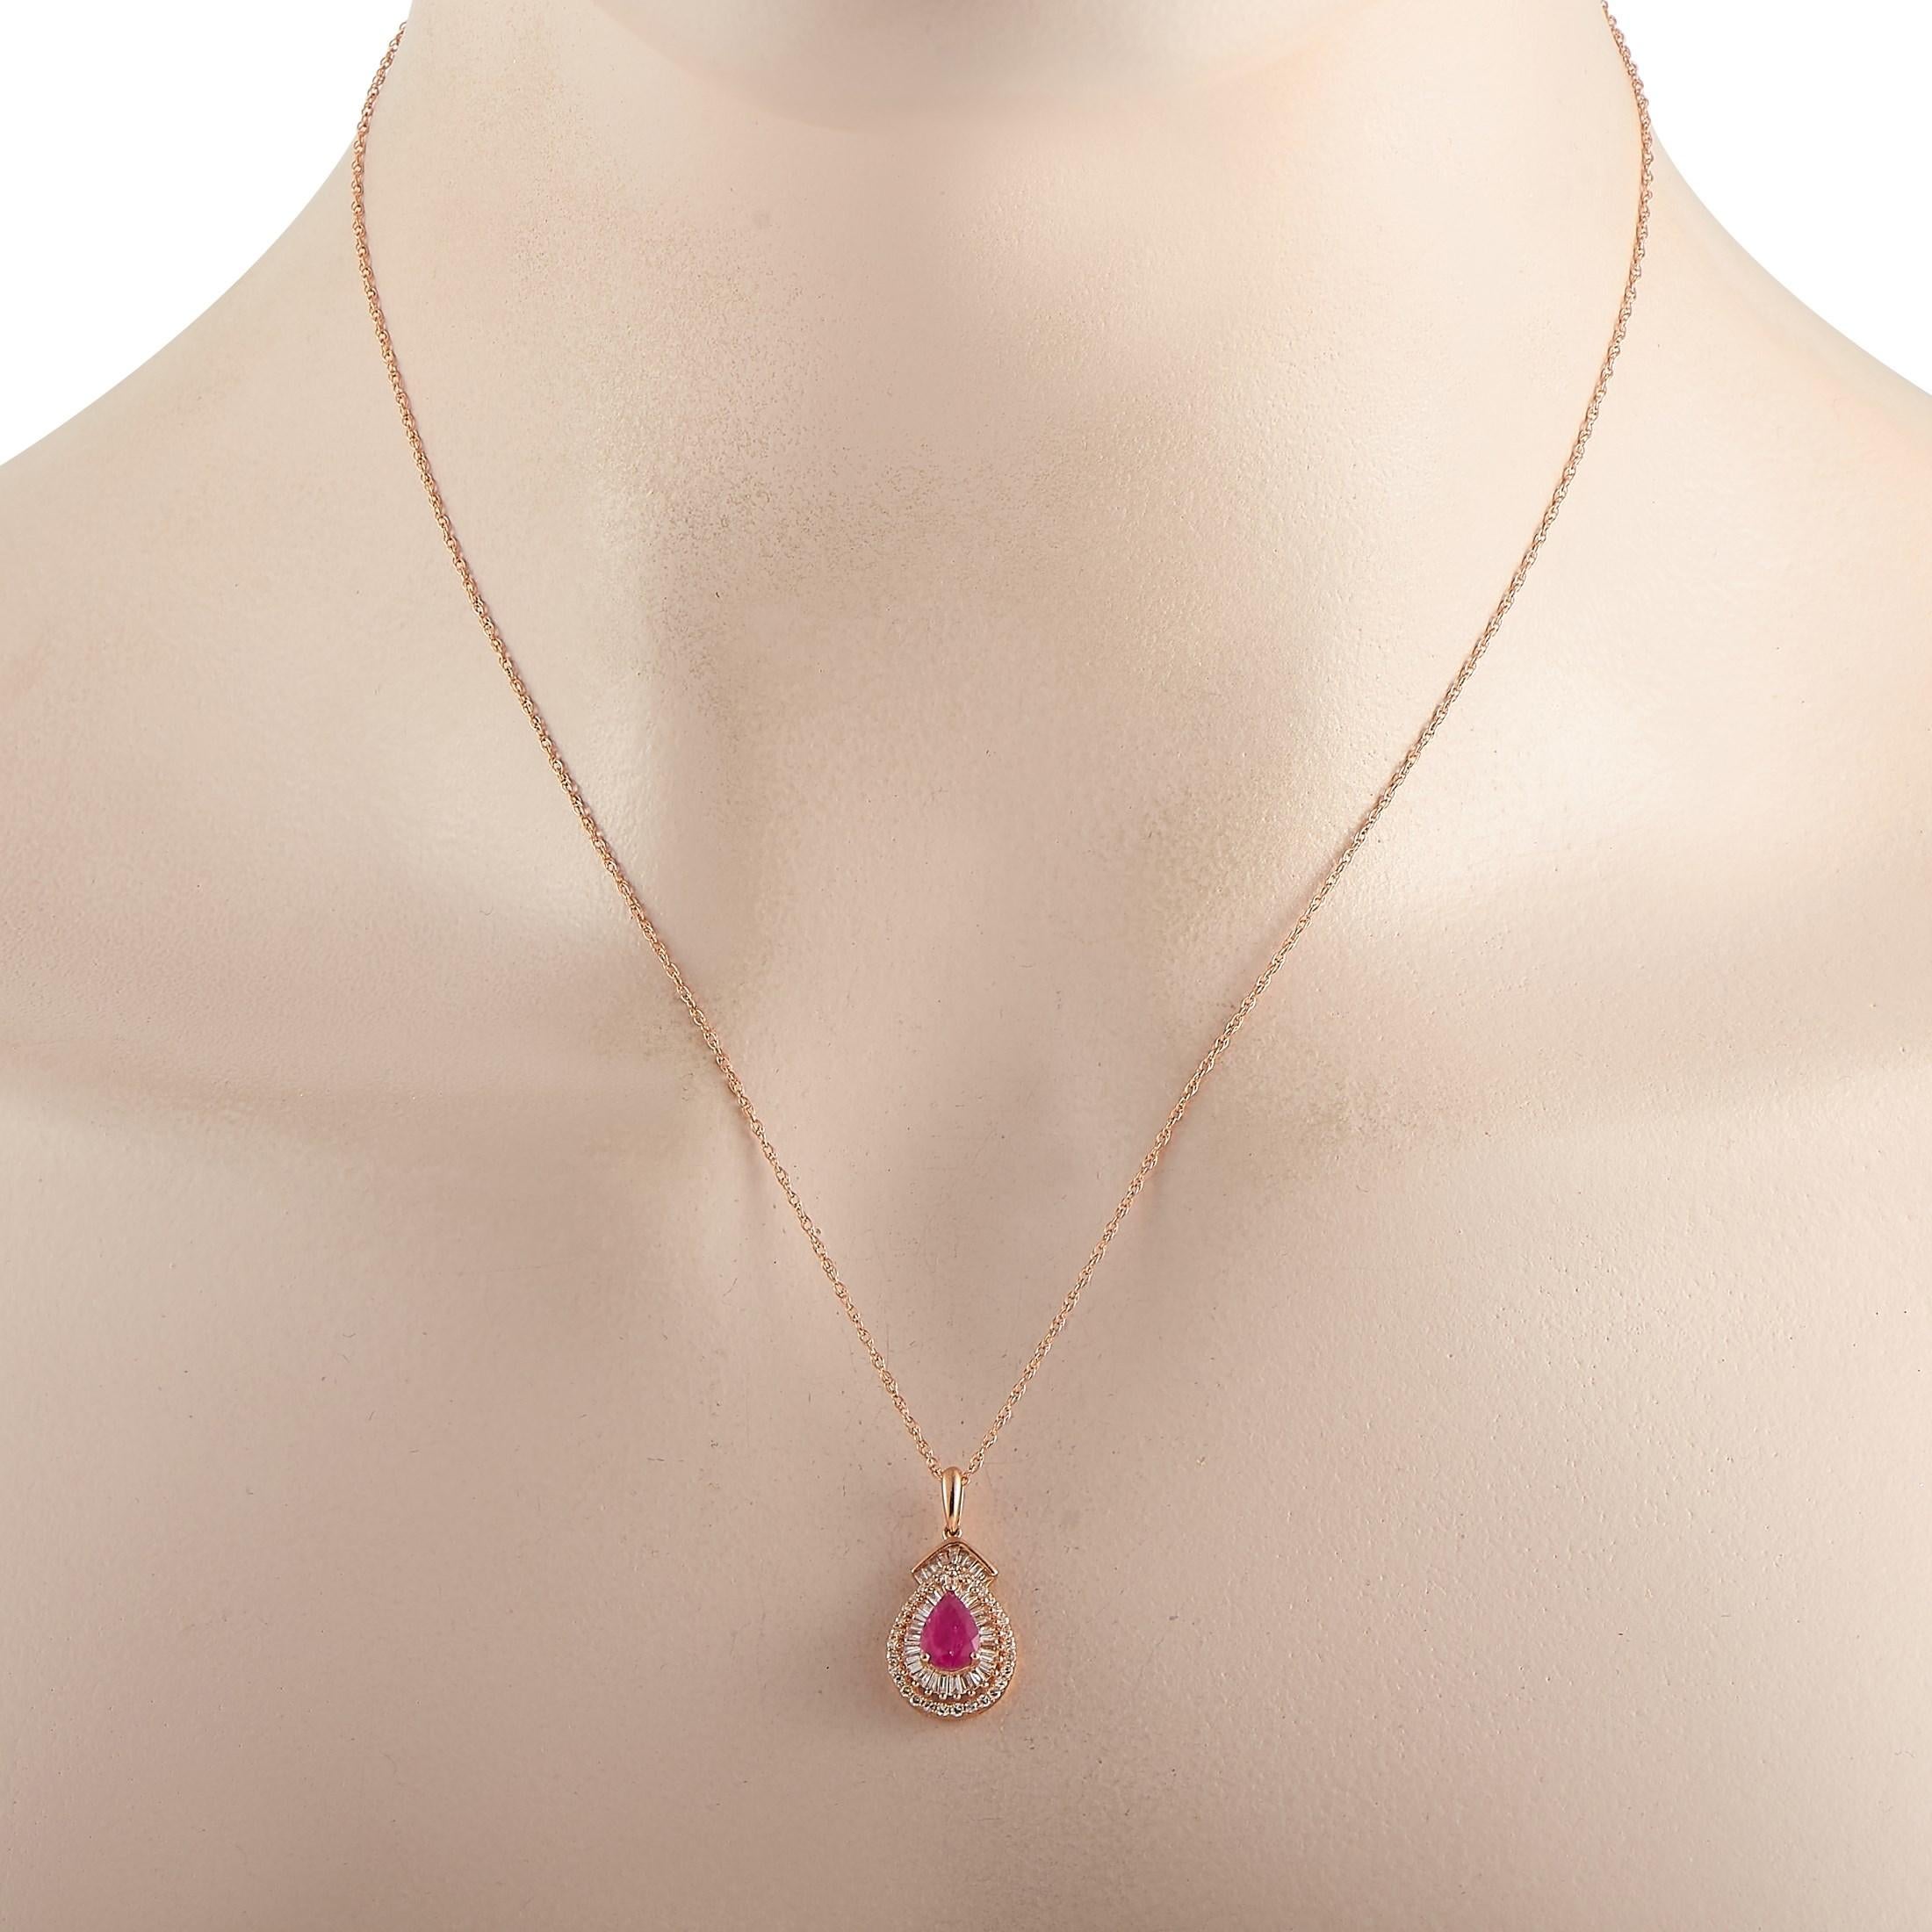 This elegant LB Exclusive 14K Rose Gold 0.50 ct Diamond and 0.90 ct Ruby Pear Shaped Pendant Necklace is a subtle statement piece that includes a delicate 14K Rose Gold chain that is 18 inches in length and features a spring-ring closure. The